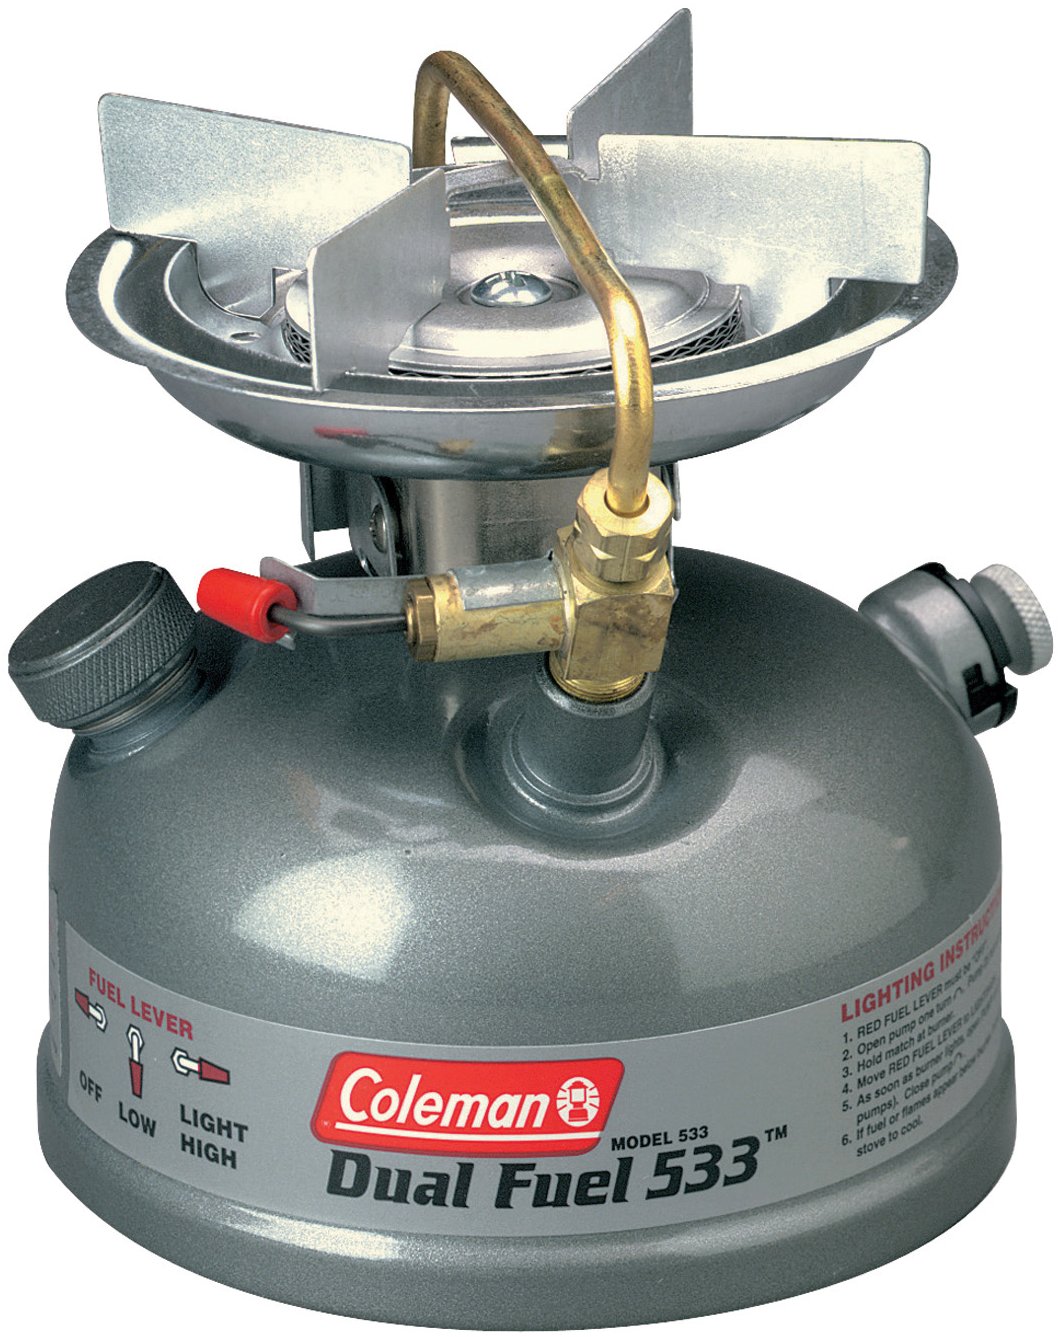 Coleman Guide Series Compact Dual Fuel Stove Filtering funnel included 